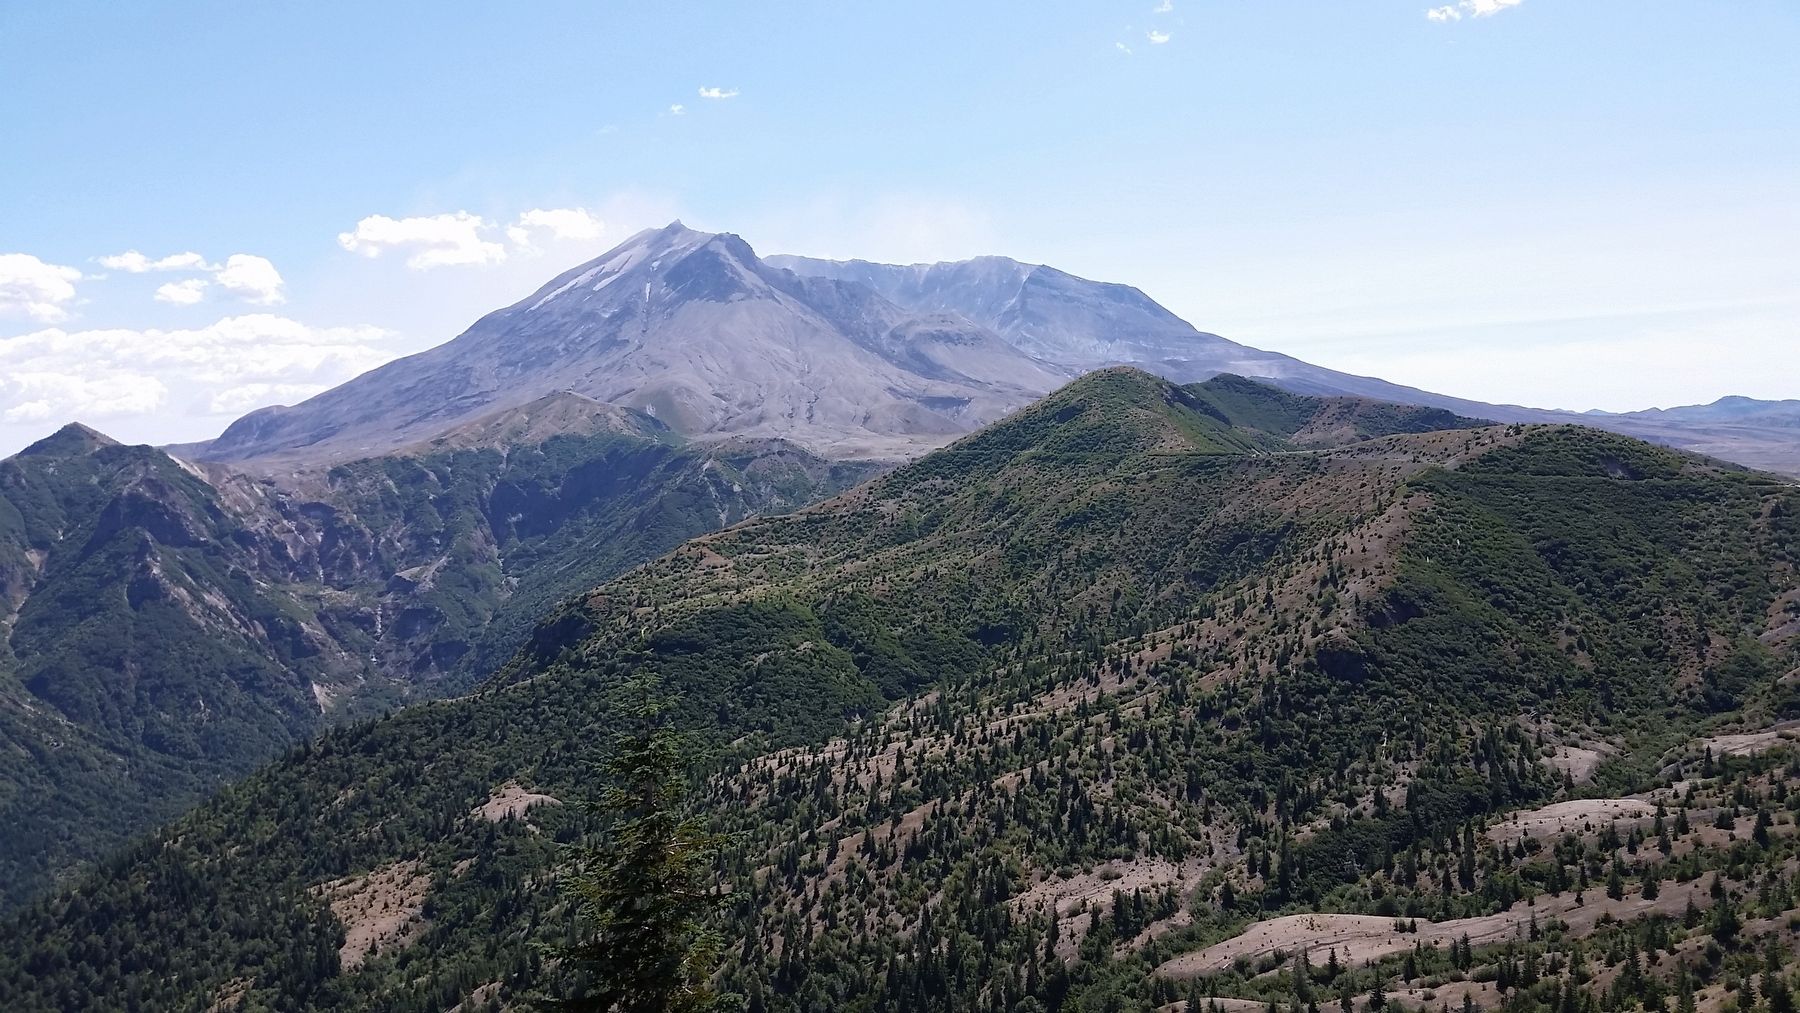 Mount St. Helens (<i>north flank • view from marker</i>) image. Click for full size.